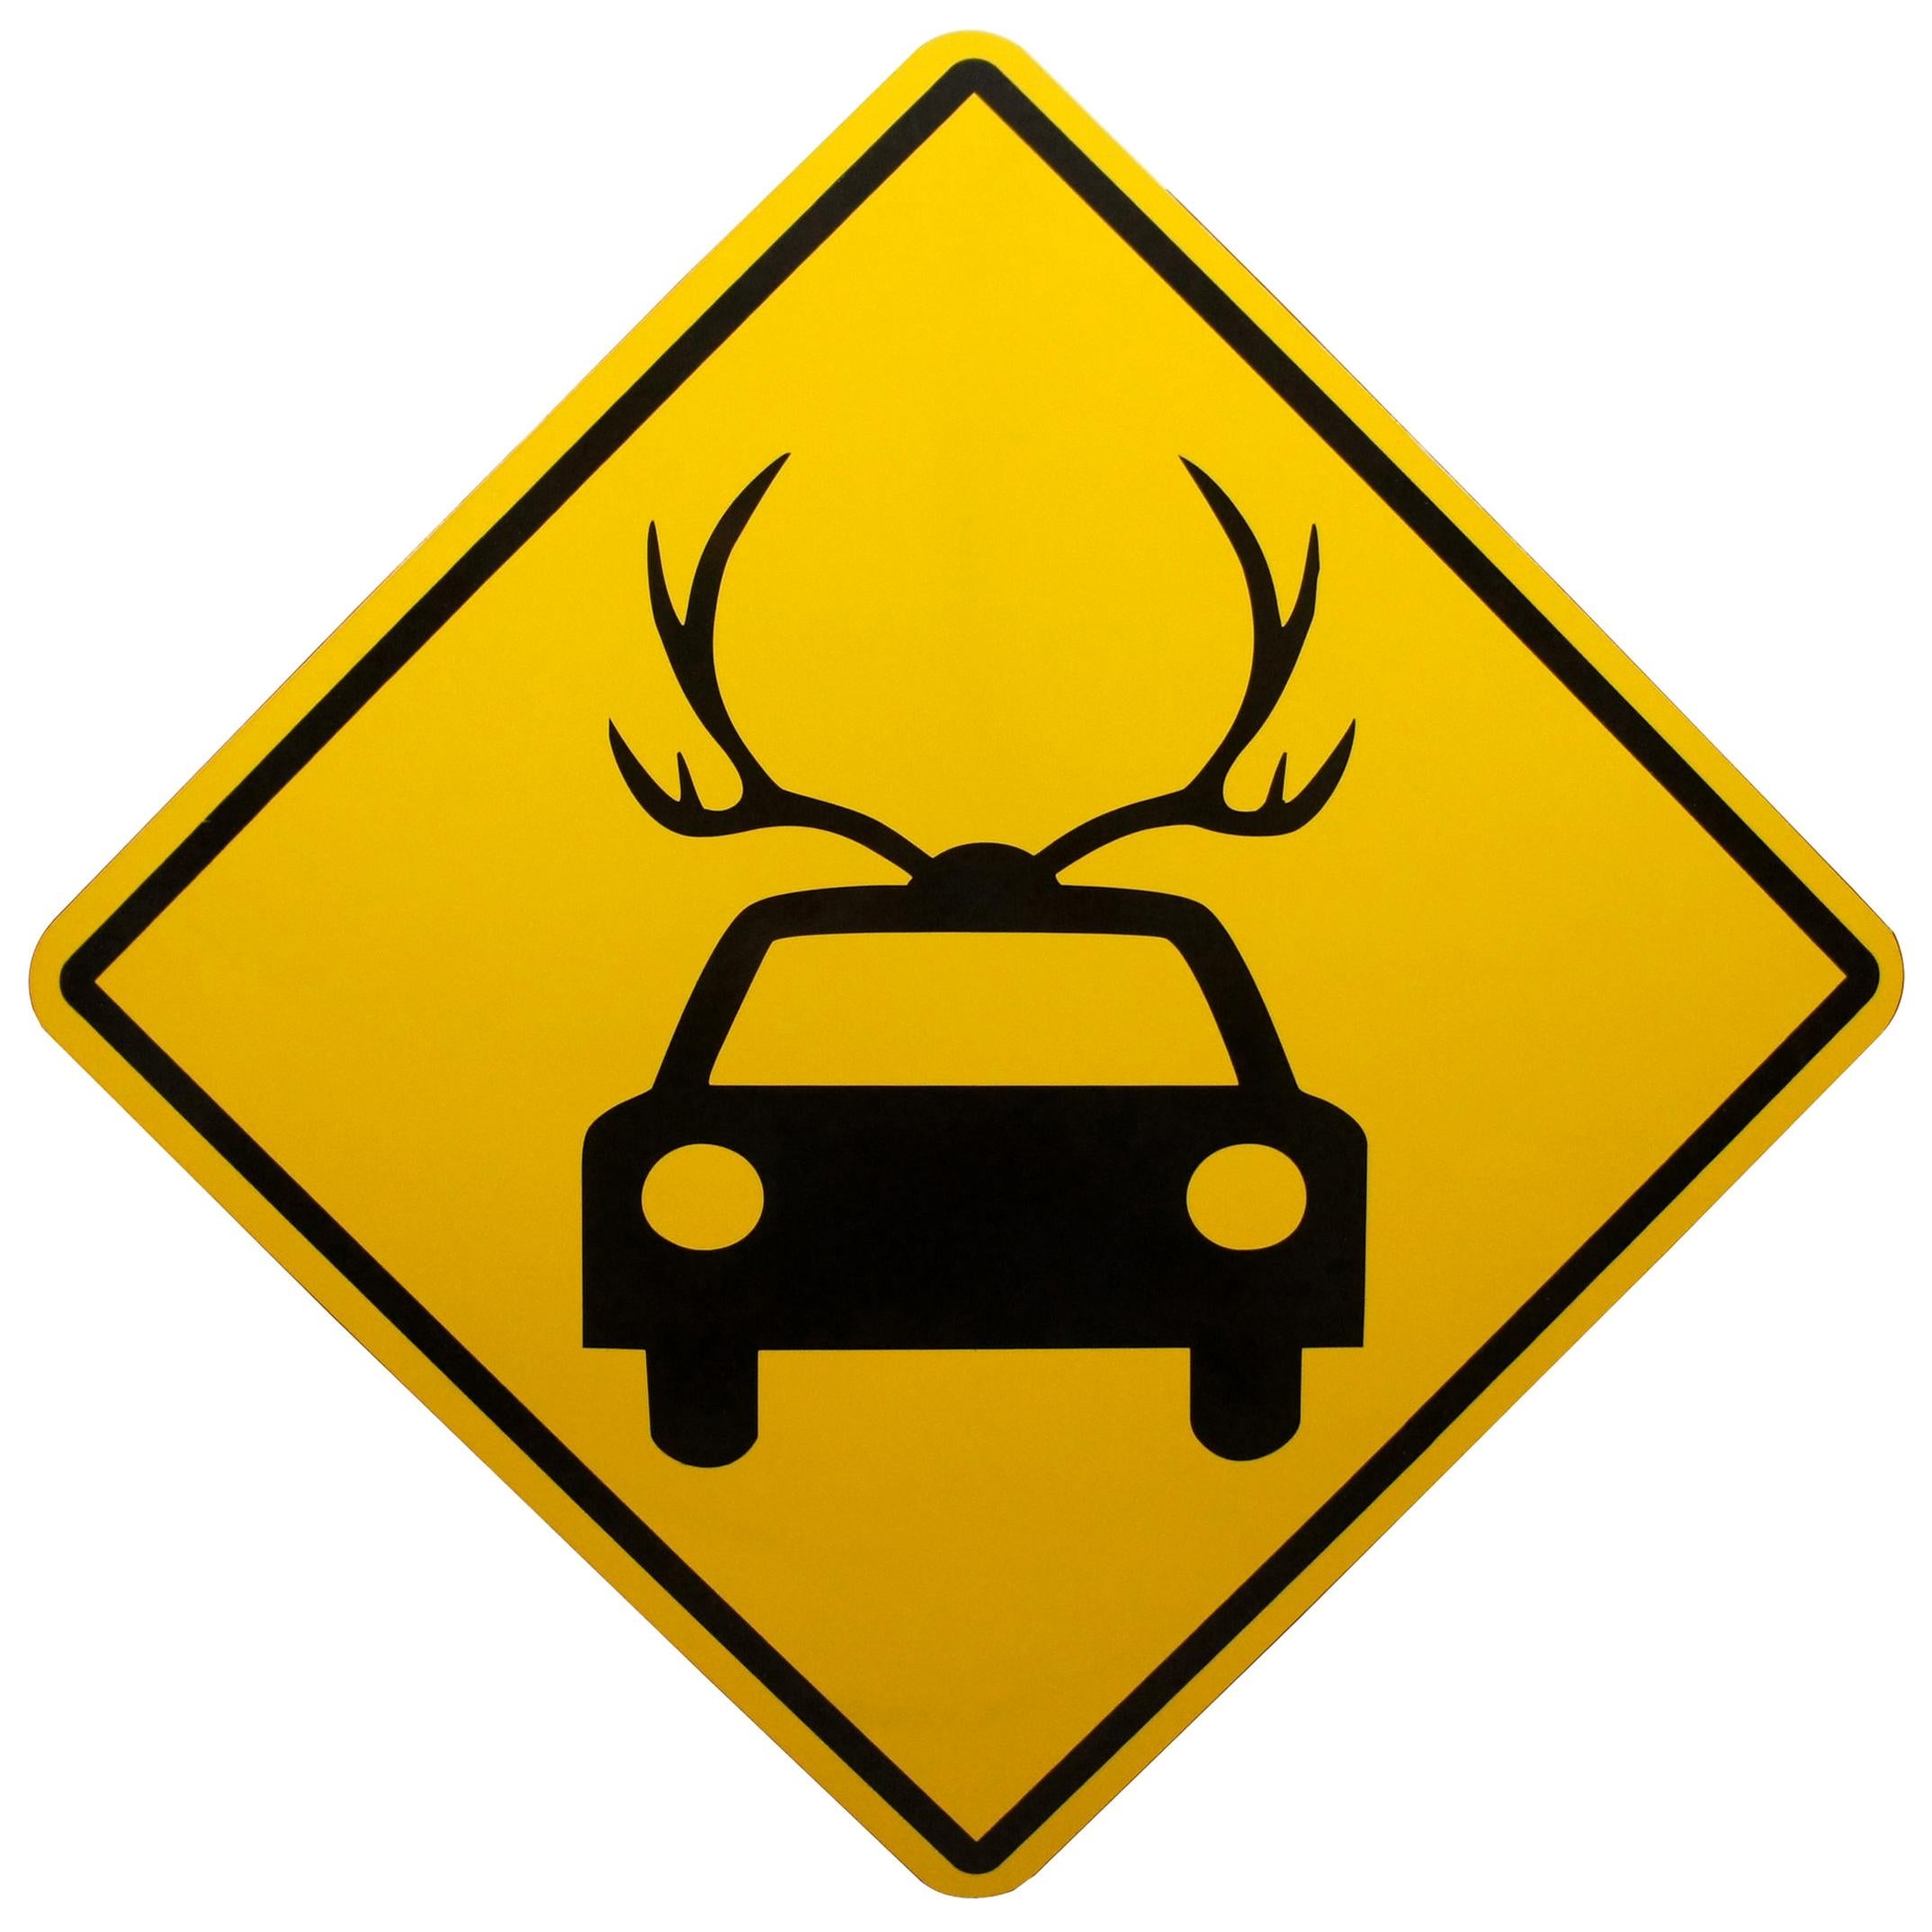 Mary Carothers Signed Untitled Road Sign 1997 Car with Antlers For Sale